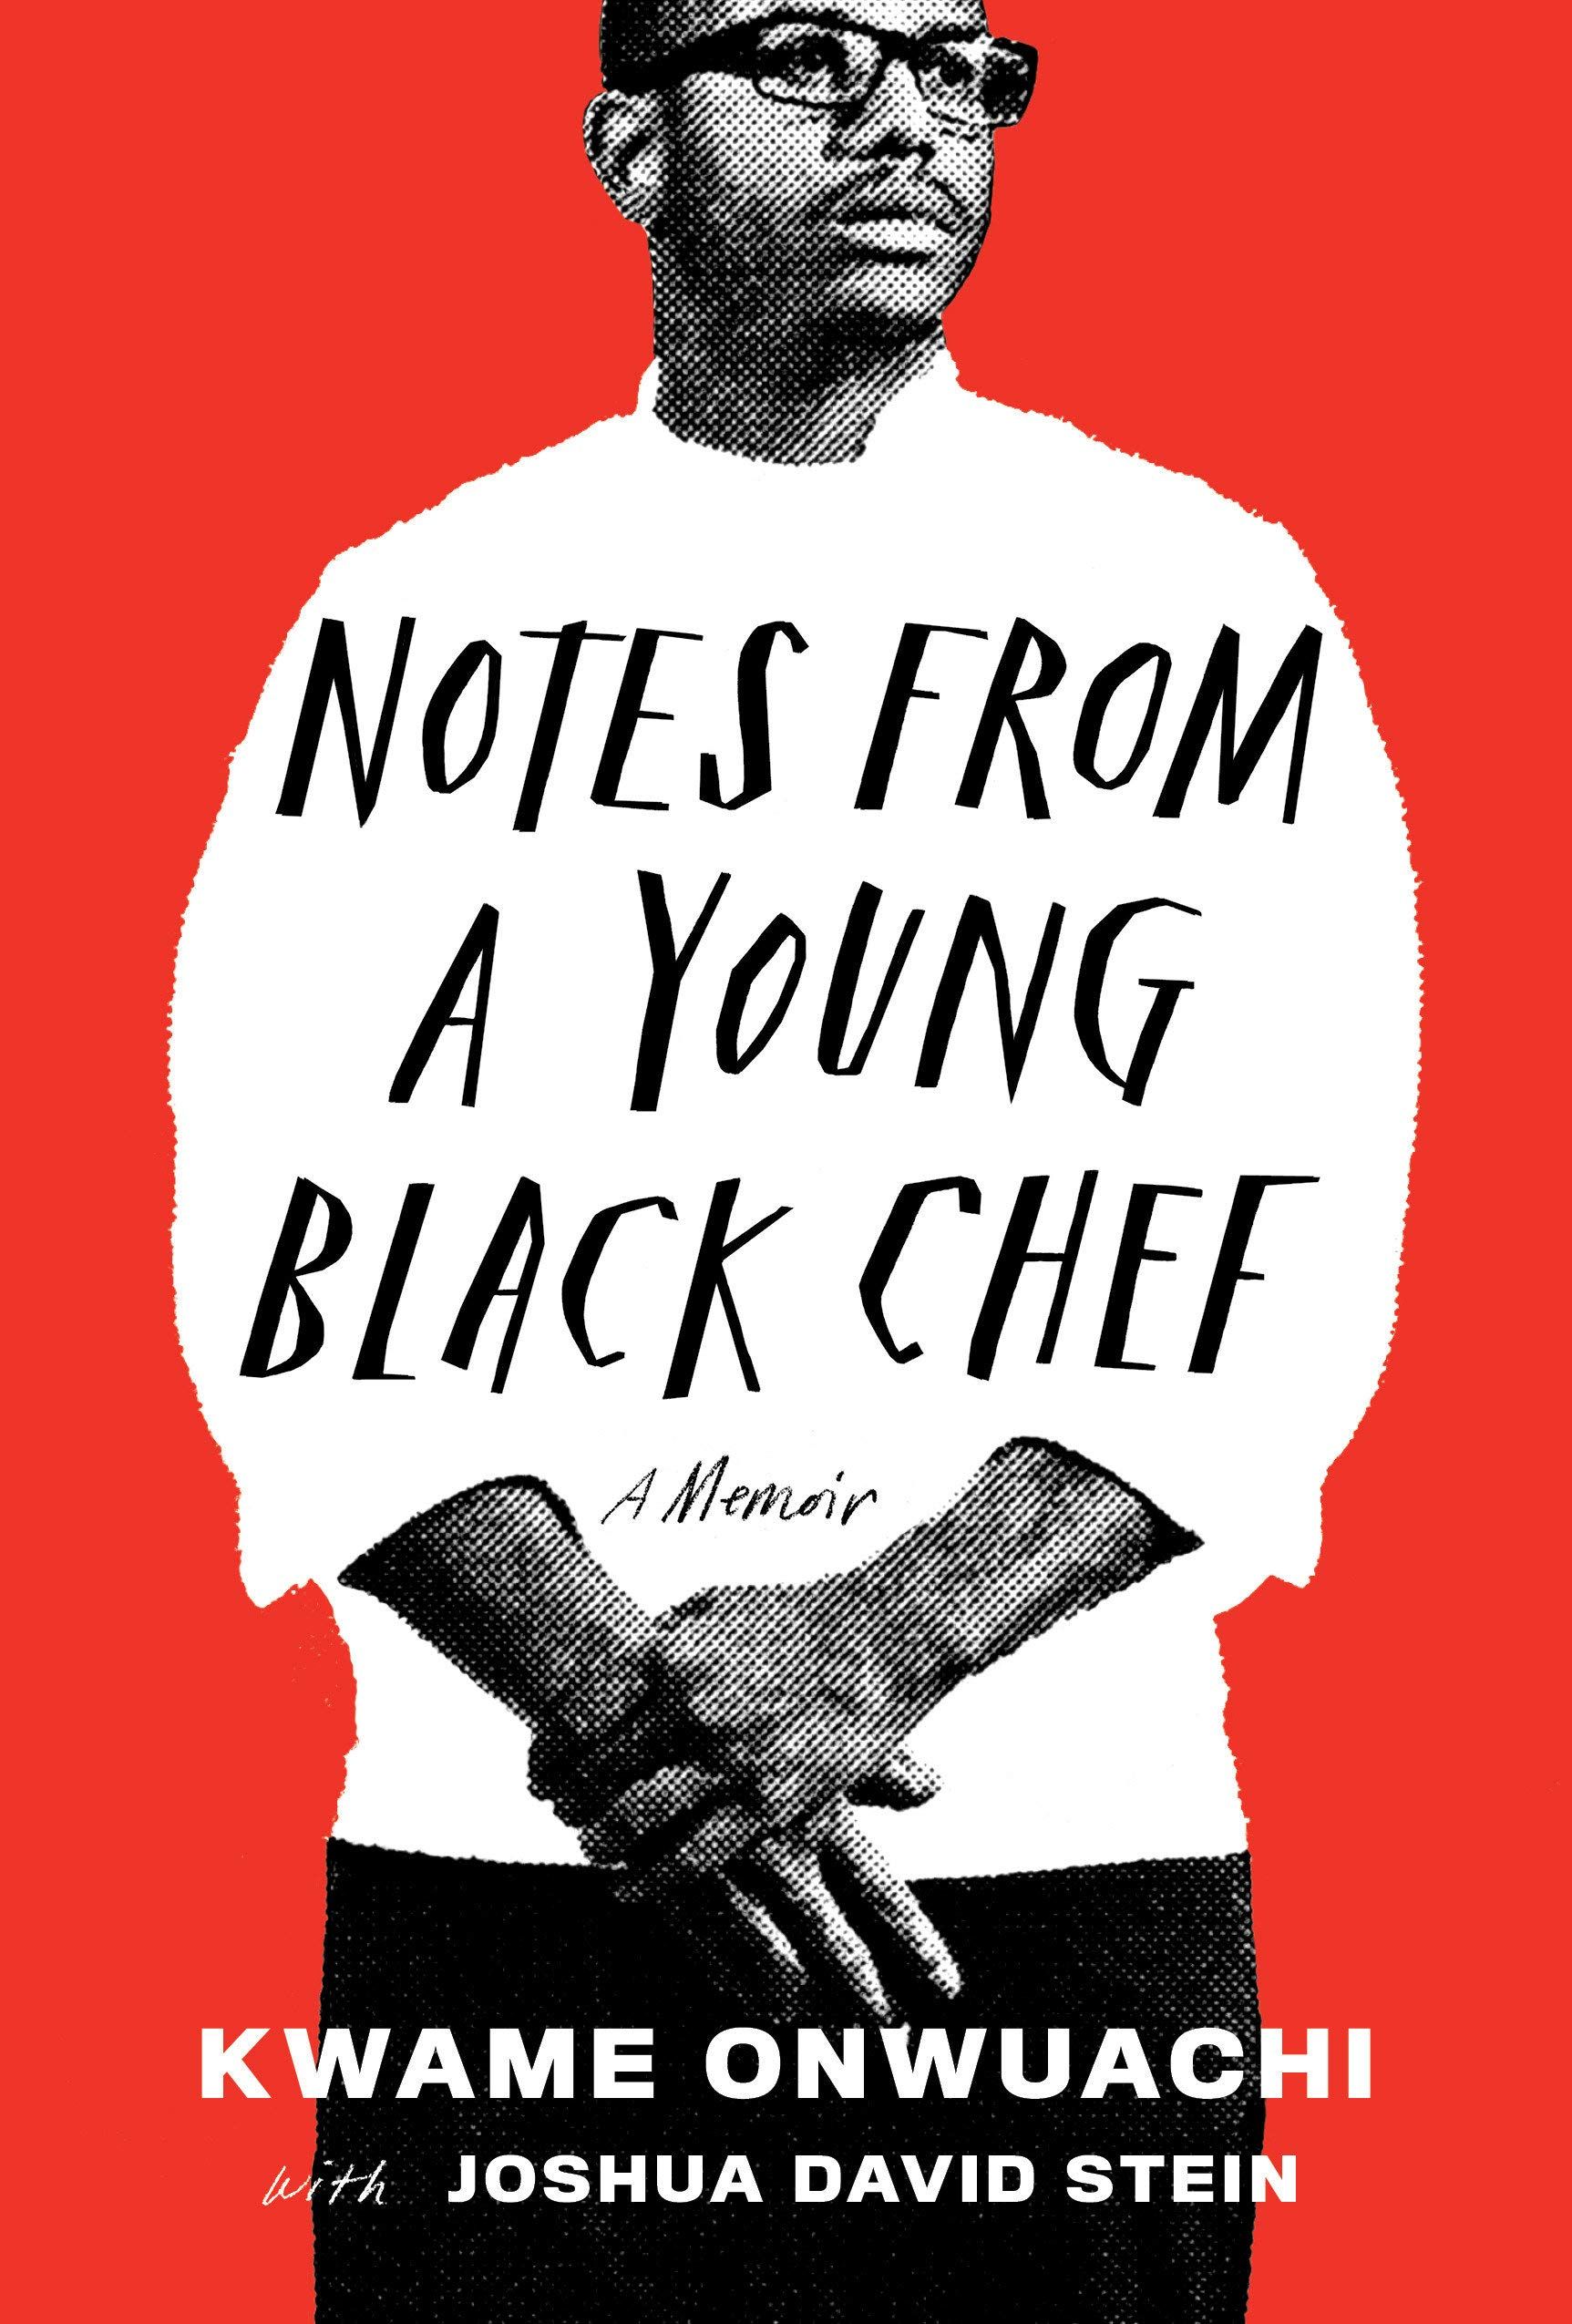 Notes from a Young Black Chef: A Memoir by Kwame Onwuachi book cover